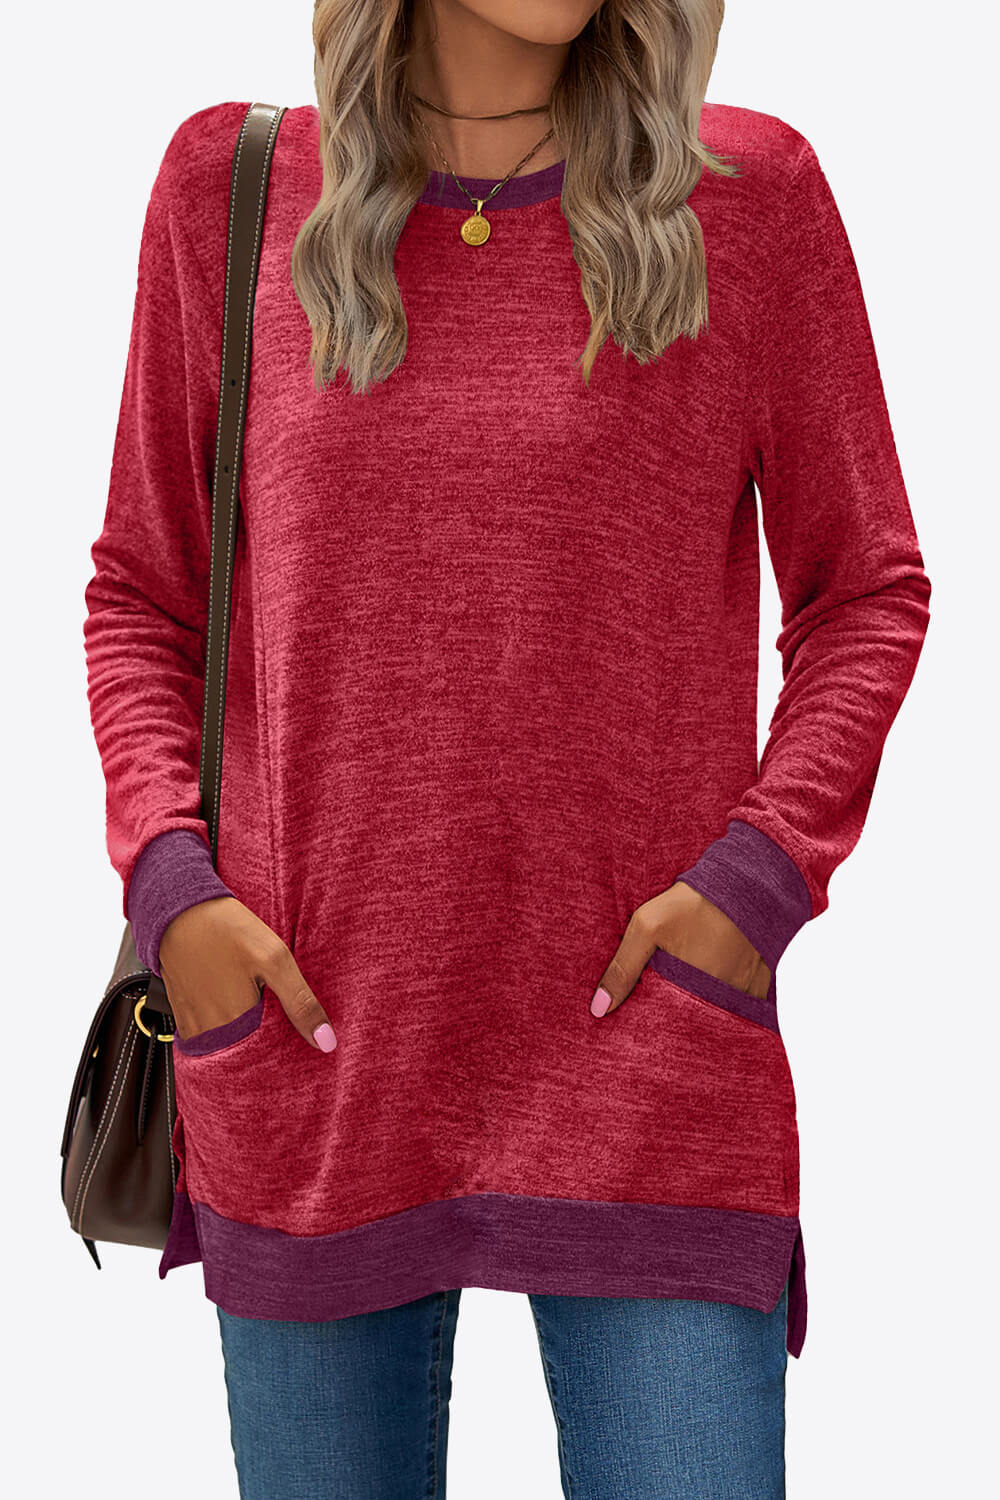 Heathered Slit Top with Pockets - T-Shirts - Shirts & Tops - 34 - 2024